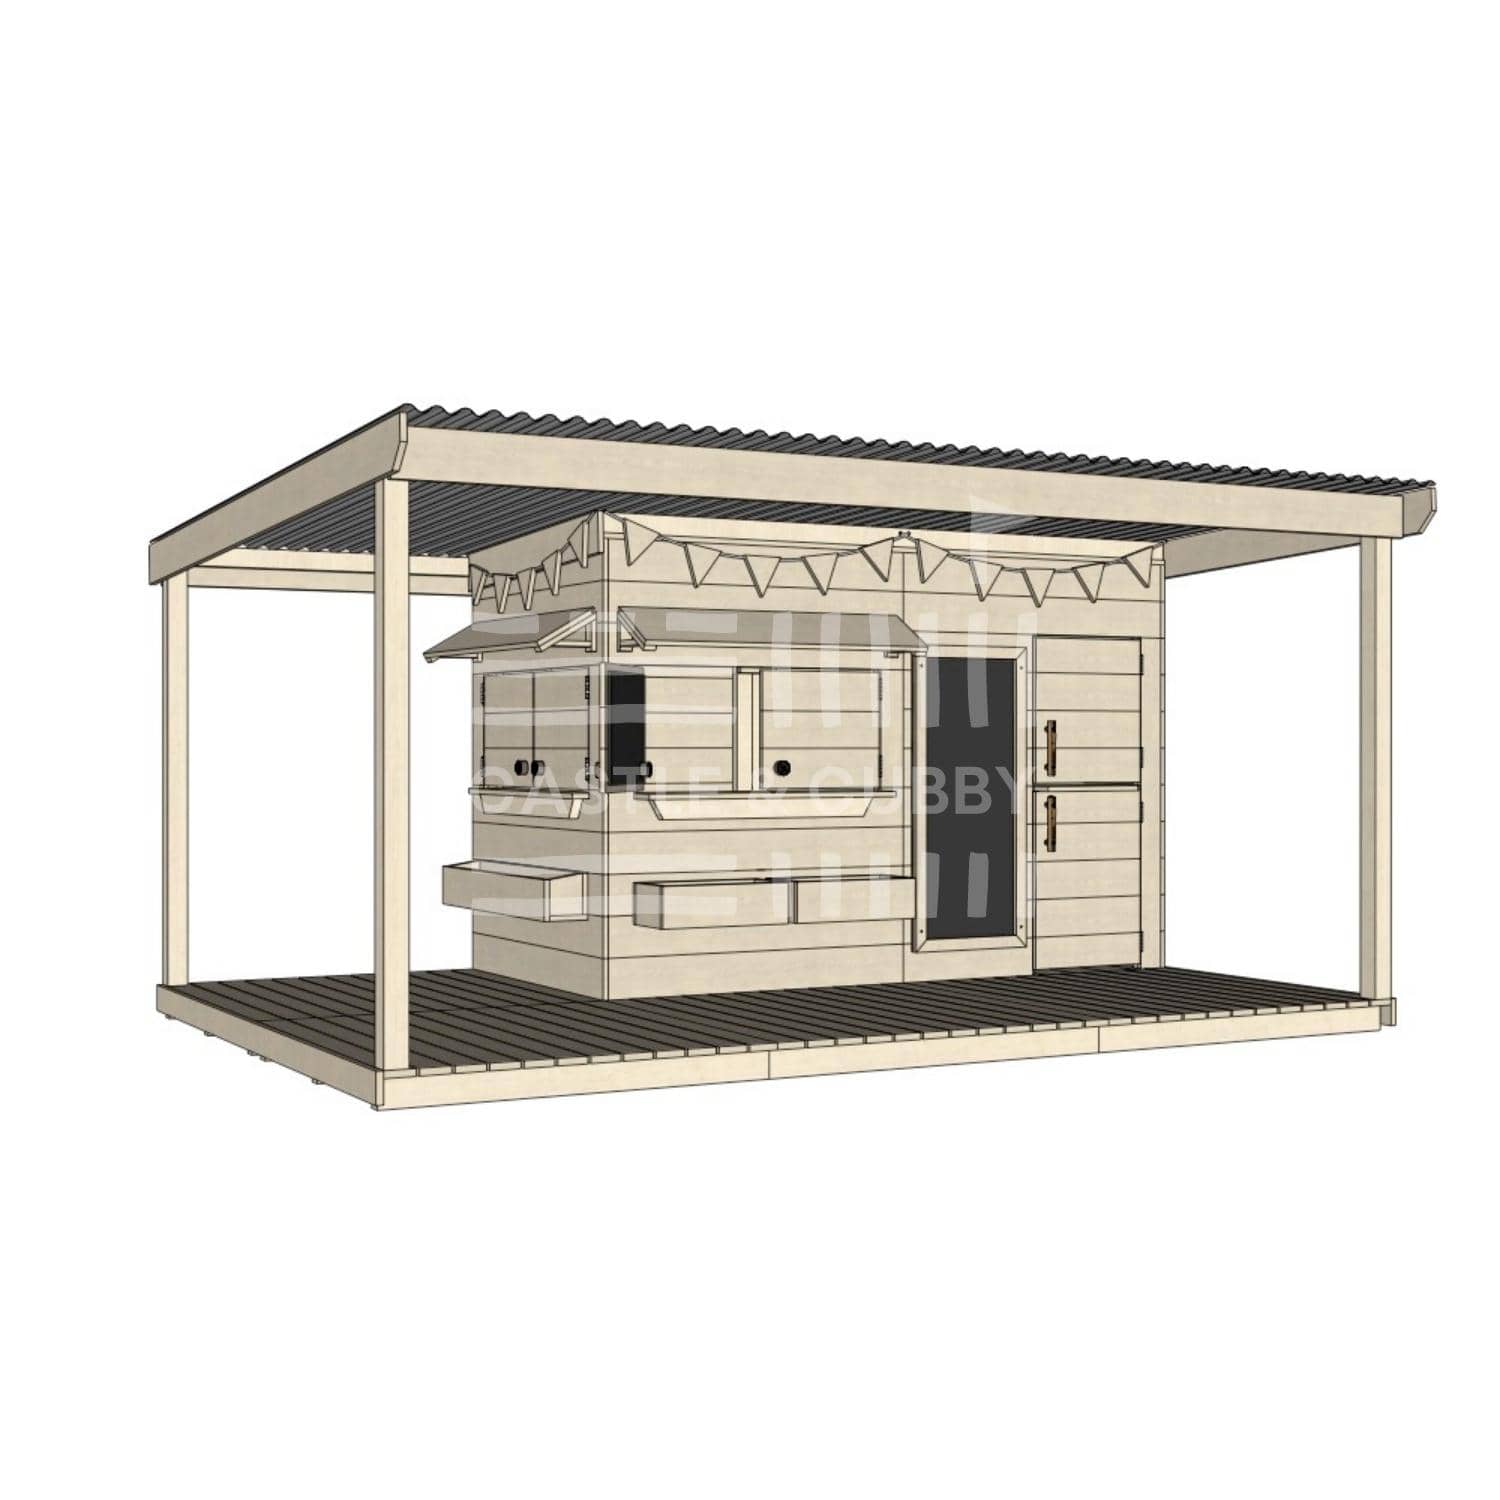 Pine timber cubby house with wraparound verandah and deck for family gardens midi rectangle size with accessories